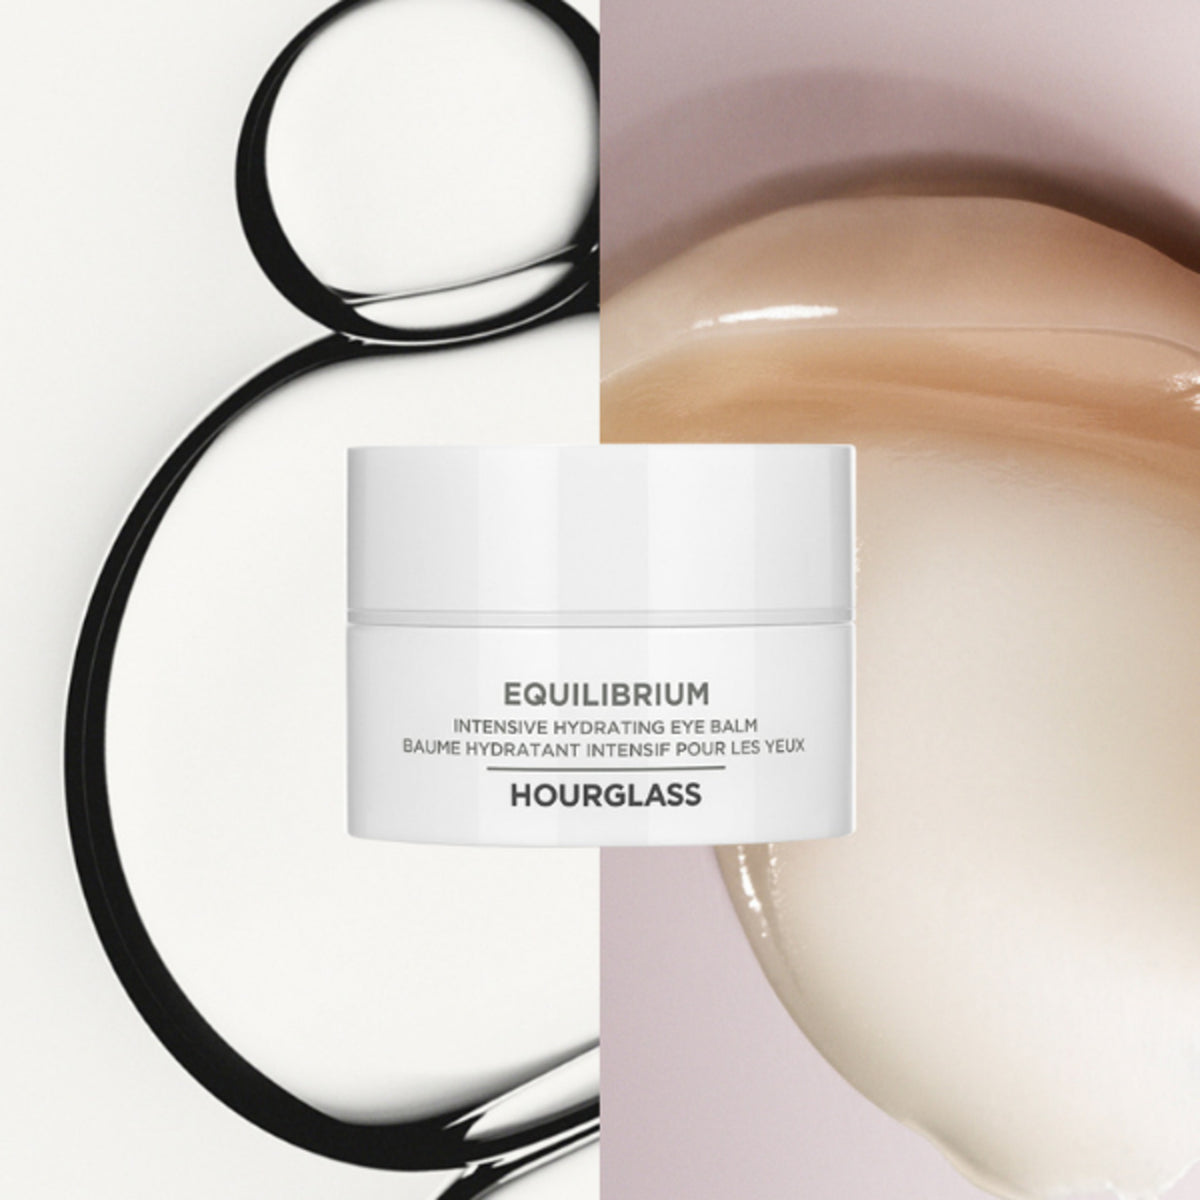 Hourglass Equilibrium Intensive Hydrating Eye Balm .